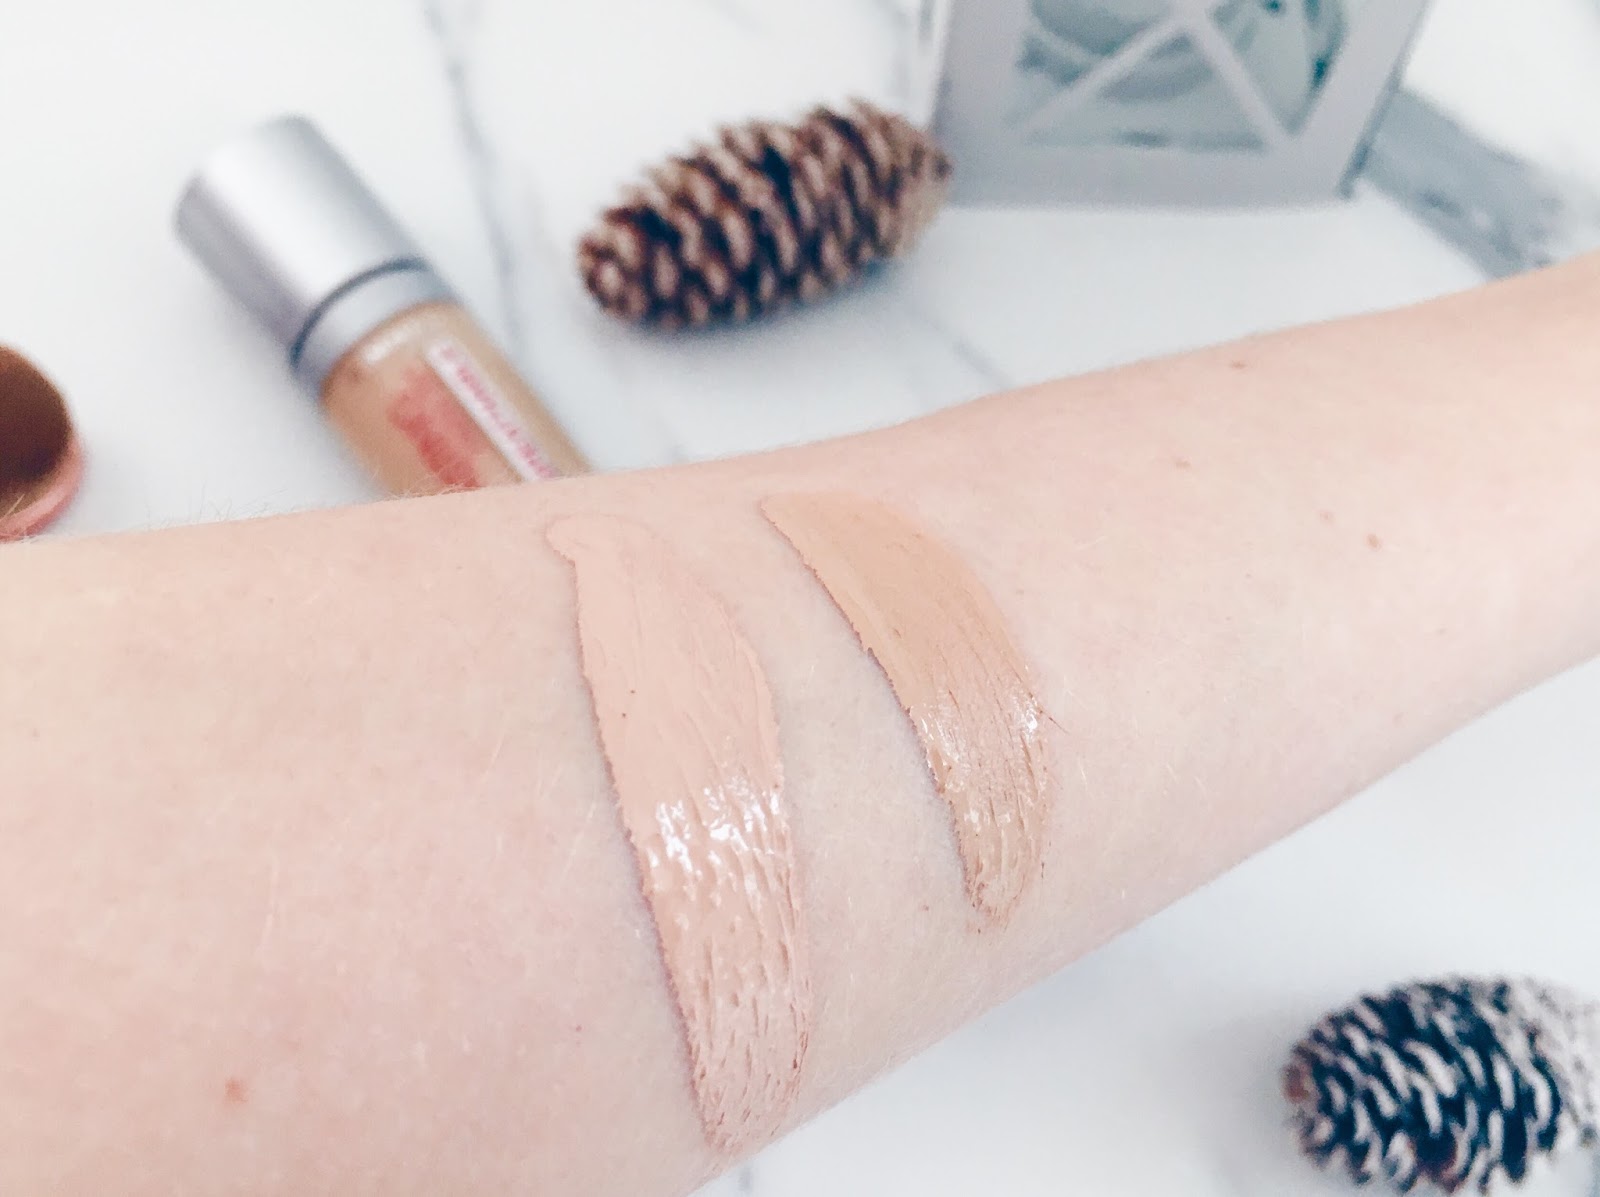 Rimmel Lasting Finish Breathable Foundation - My Holy Grail Base Review